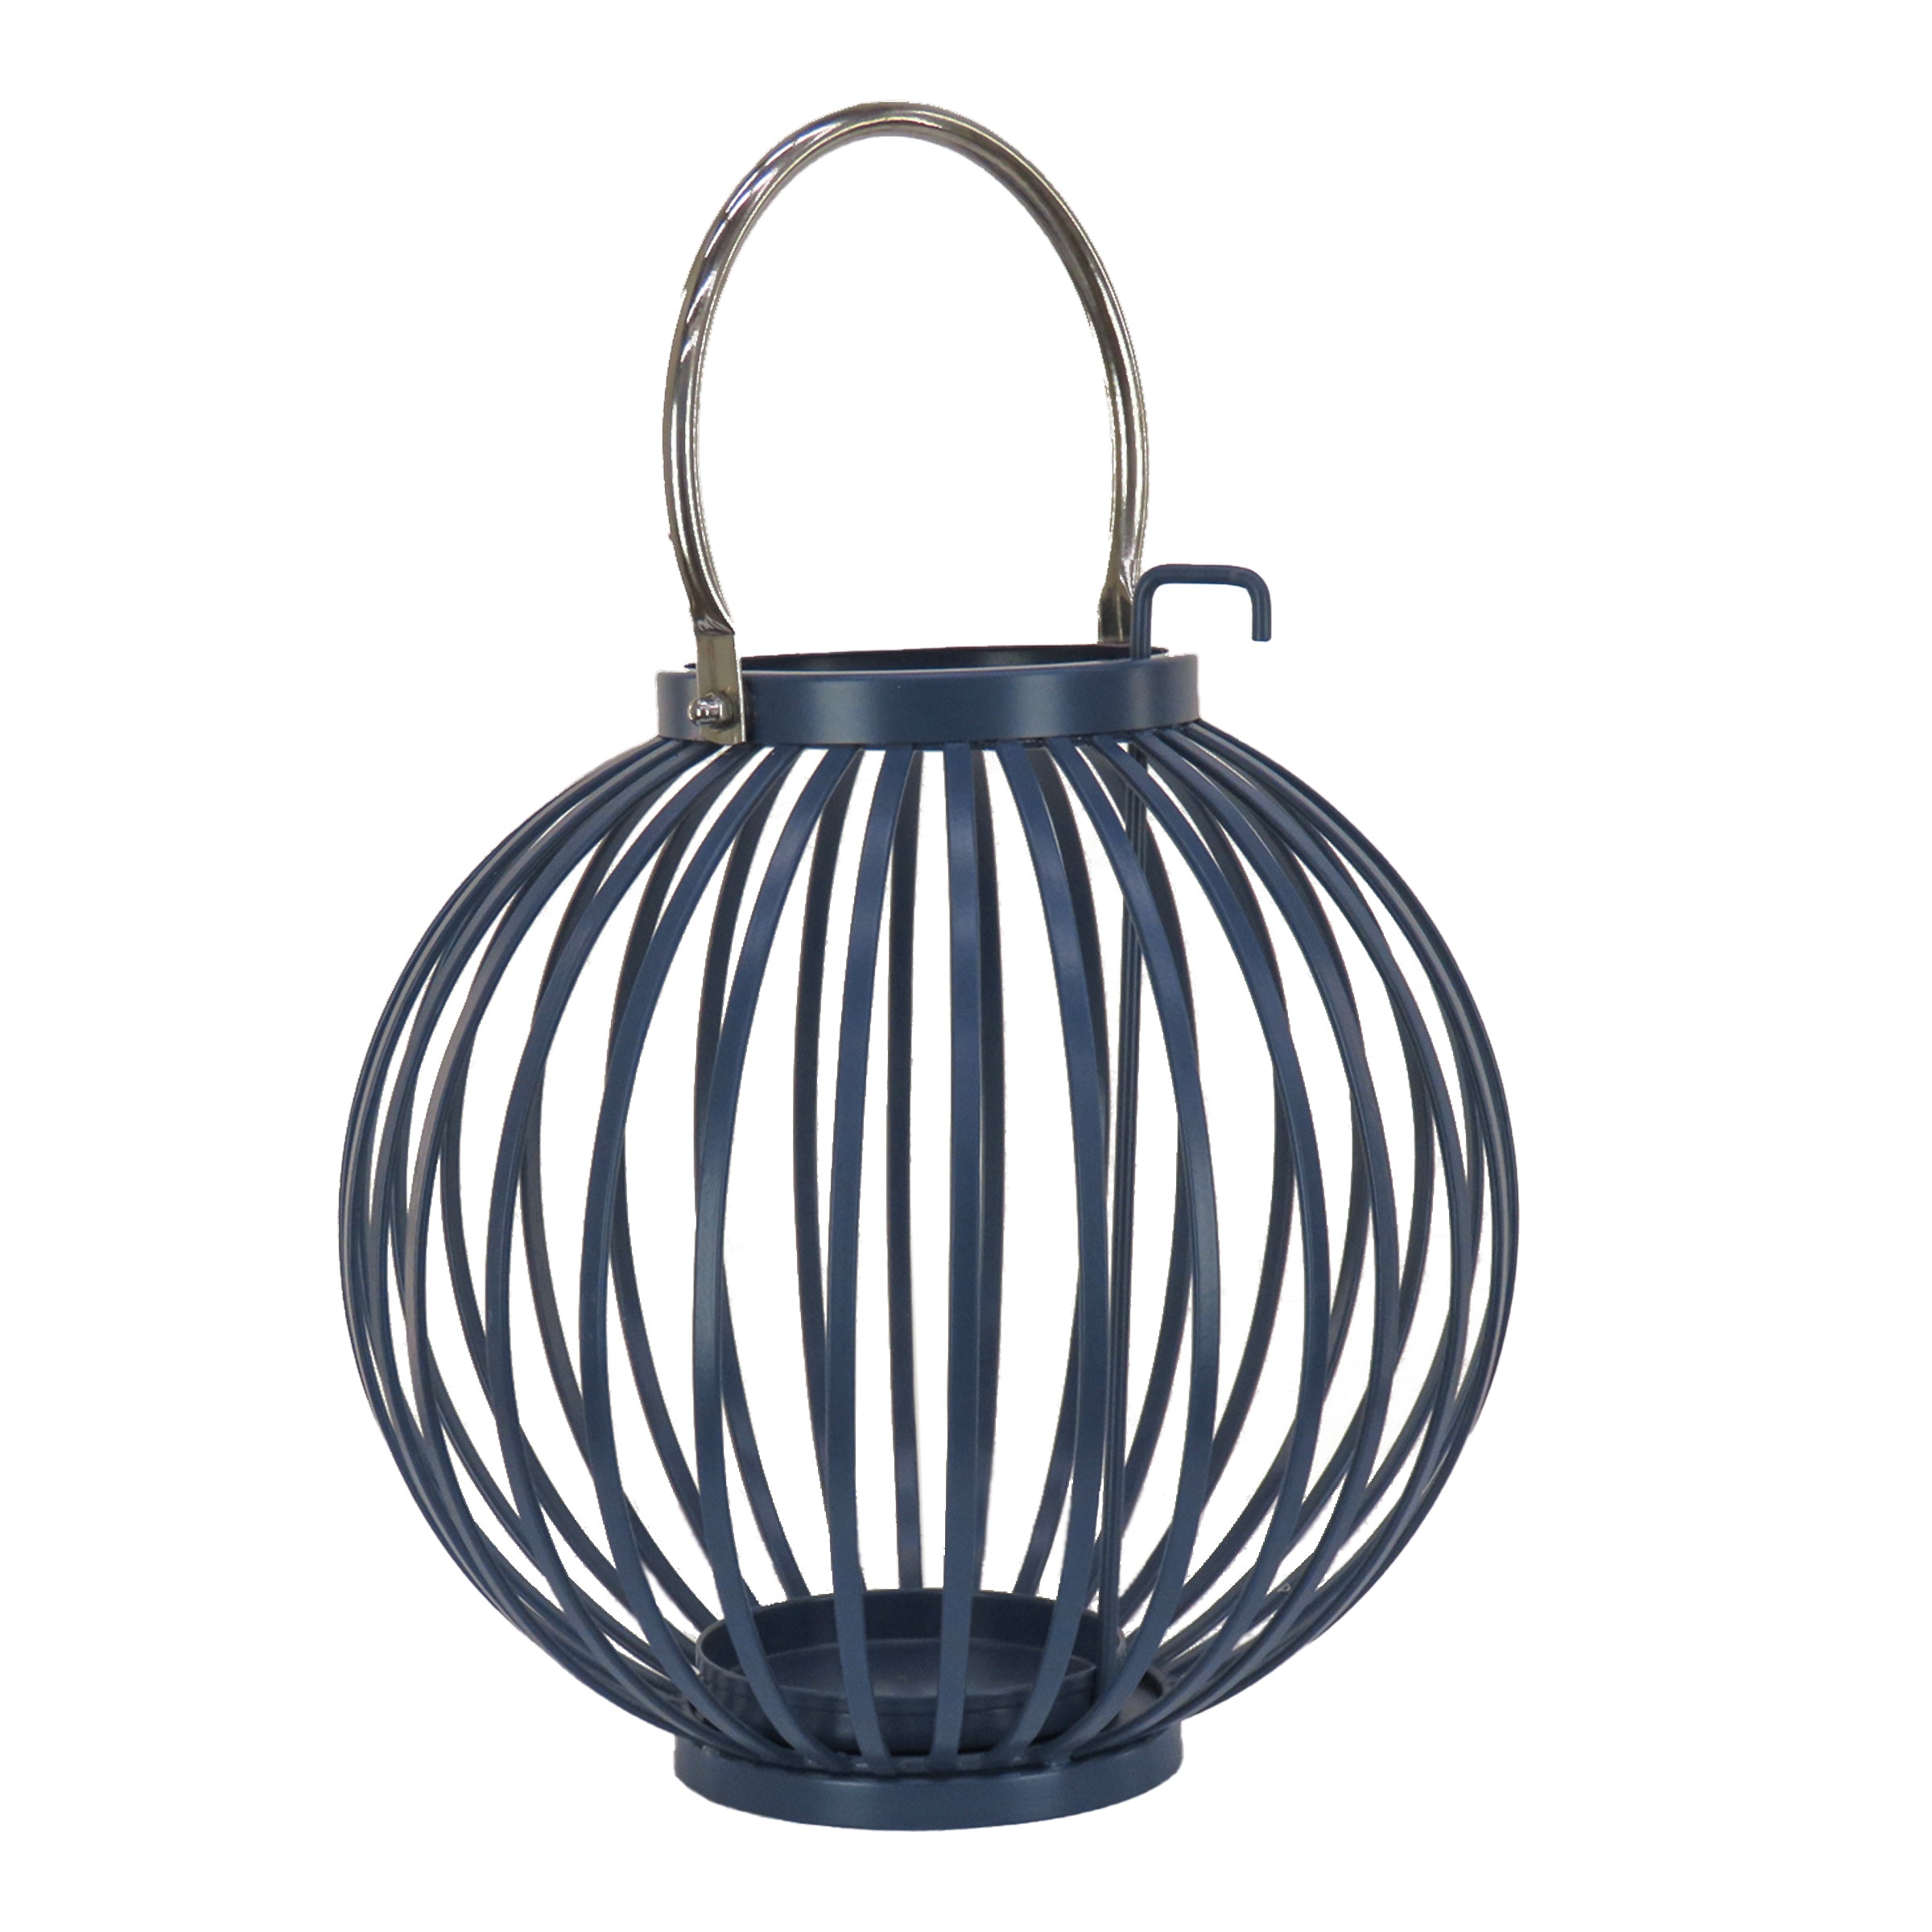 National Outdoor Living Lantern Candleholder, Rounded Shape, Dark Blue, Modern Design and Finish, Includes Metal Handle, 11 Inches